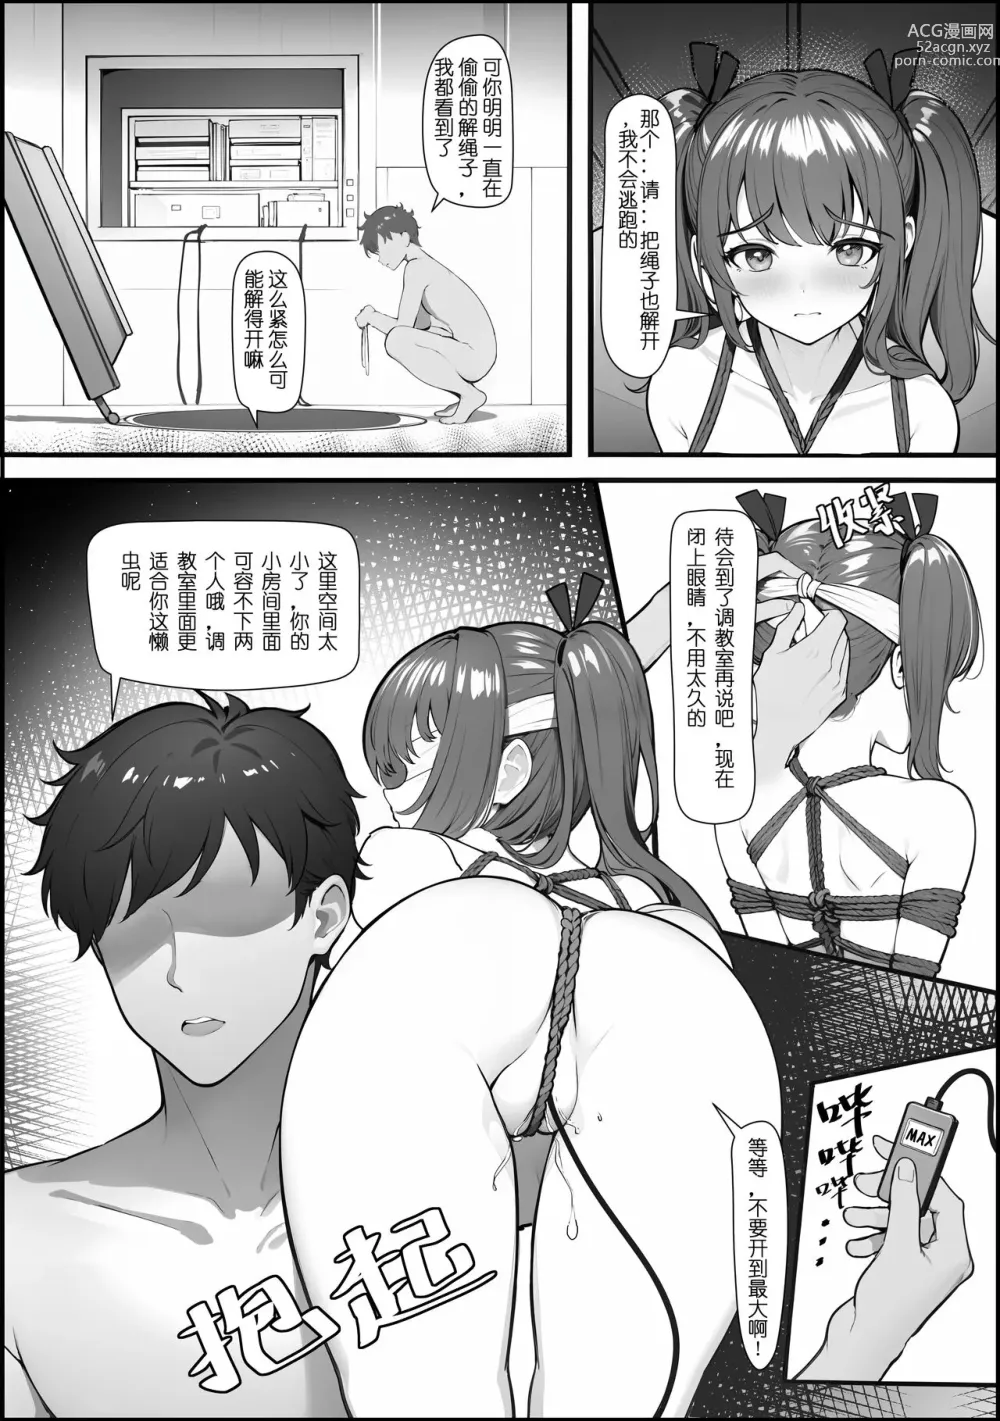 Page 3 of doujinshi 01号人偶剧情